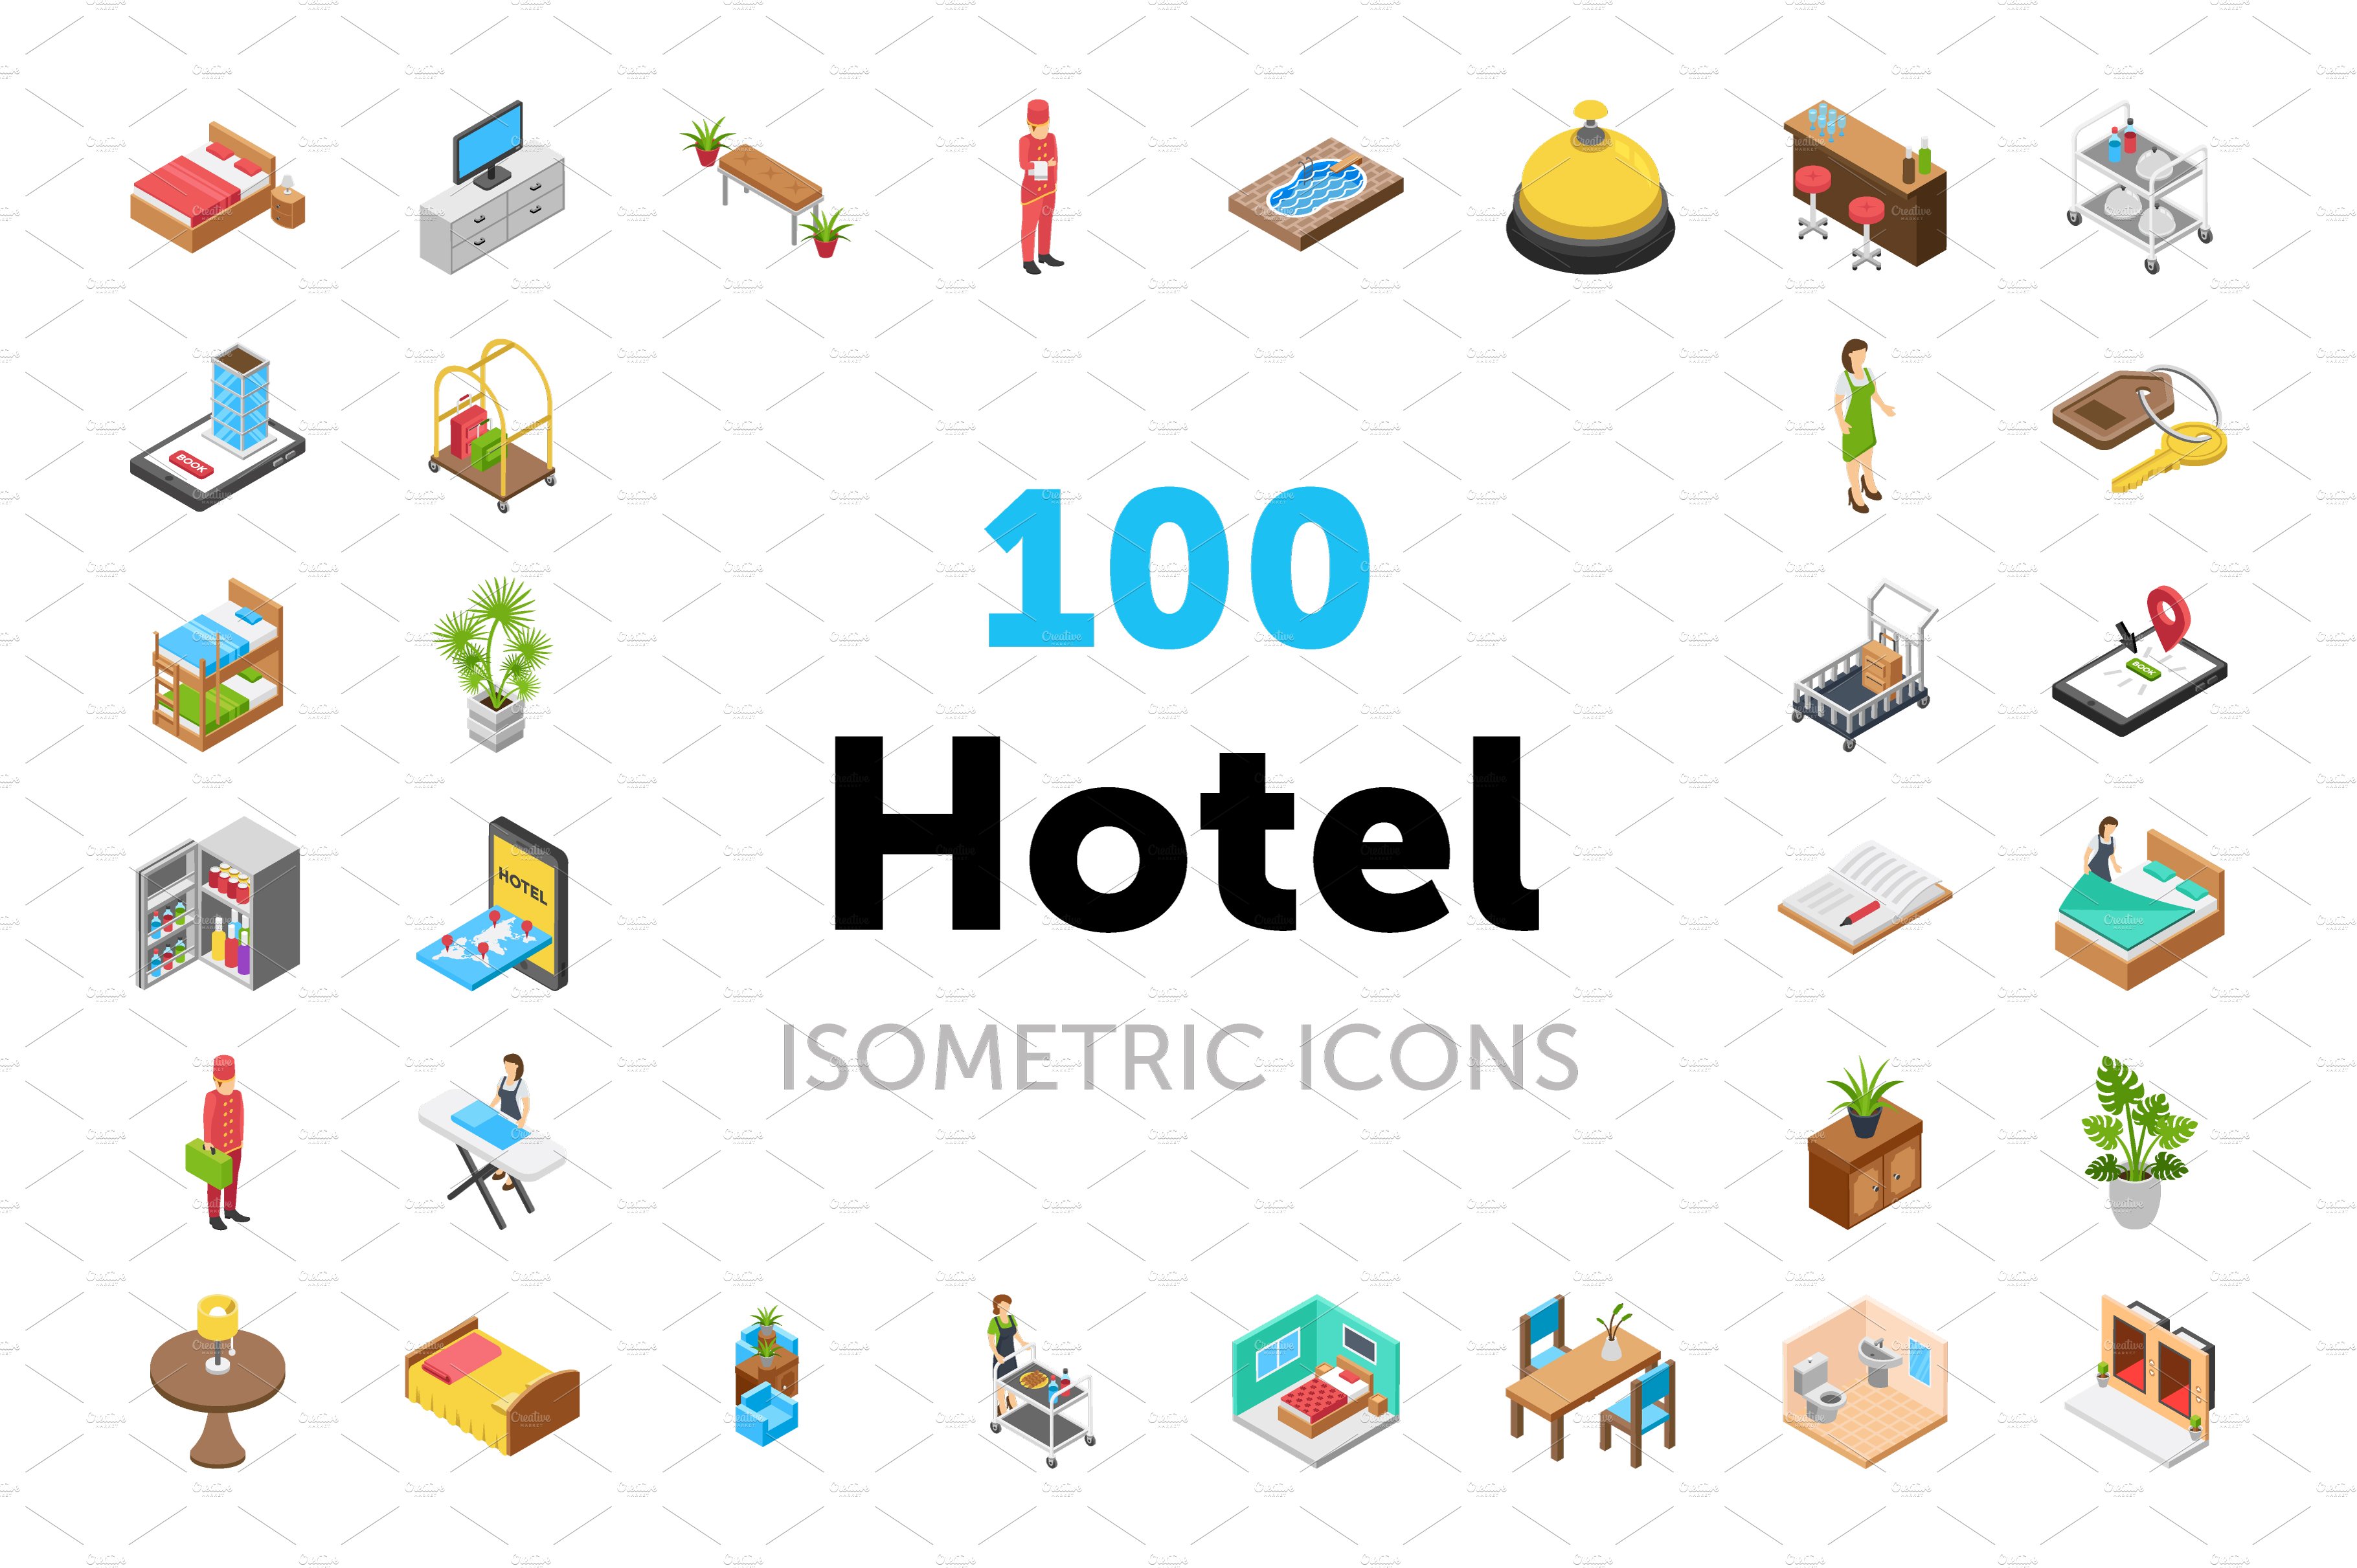 100 Hotel Isometric Icons Pack cover image.